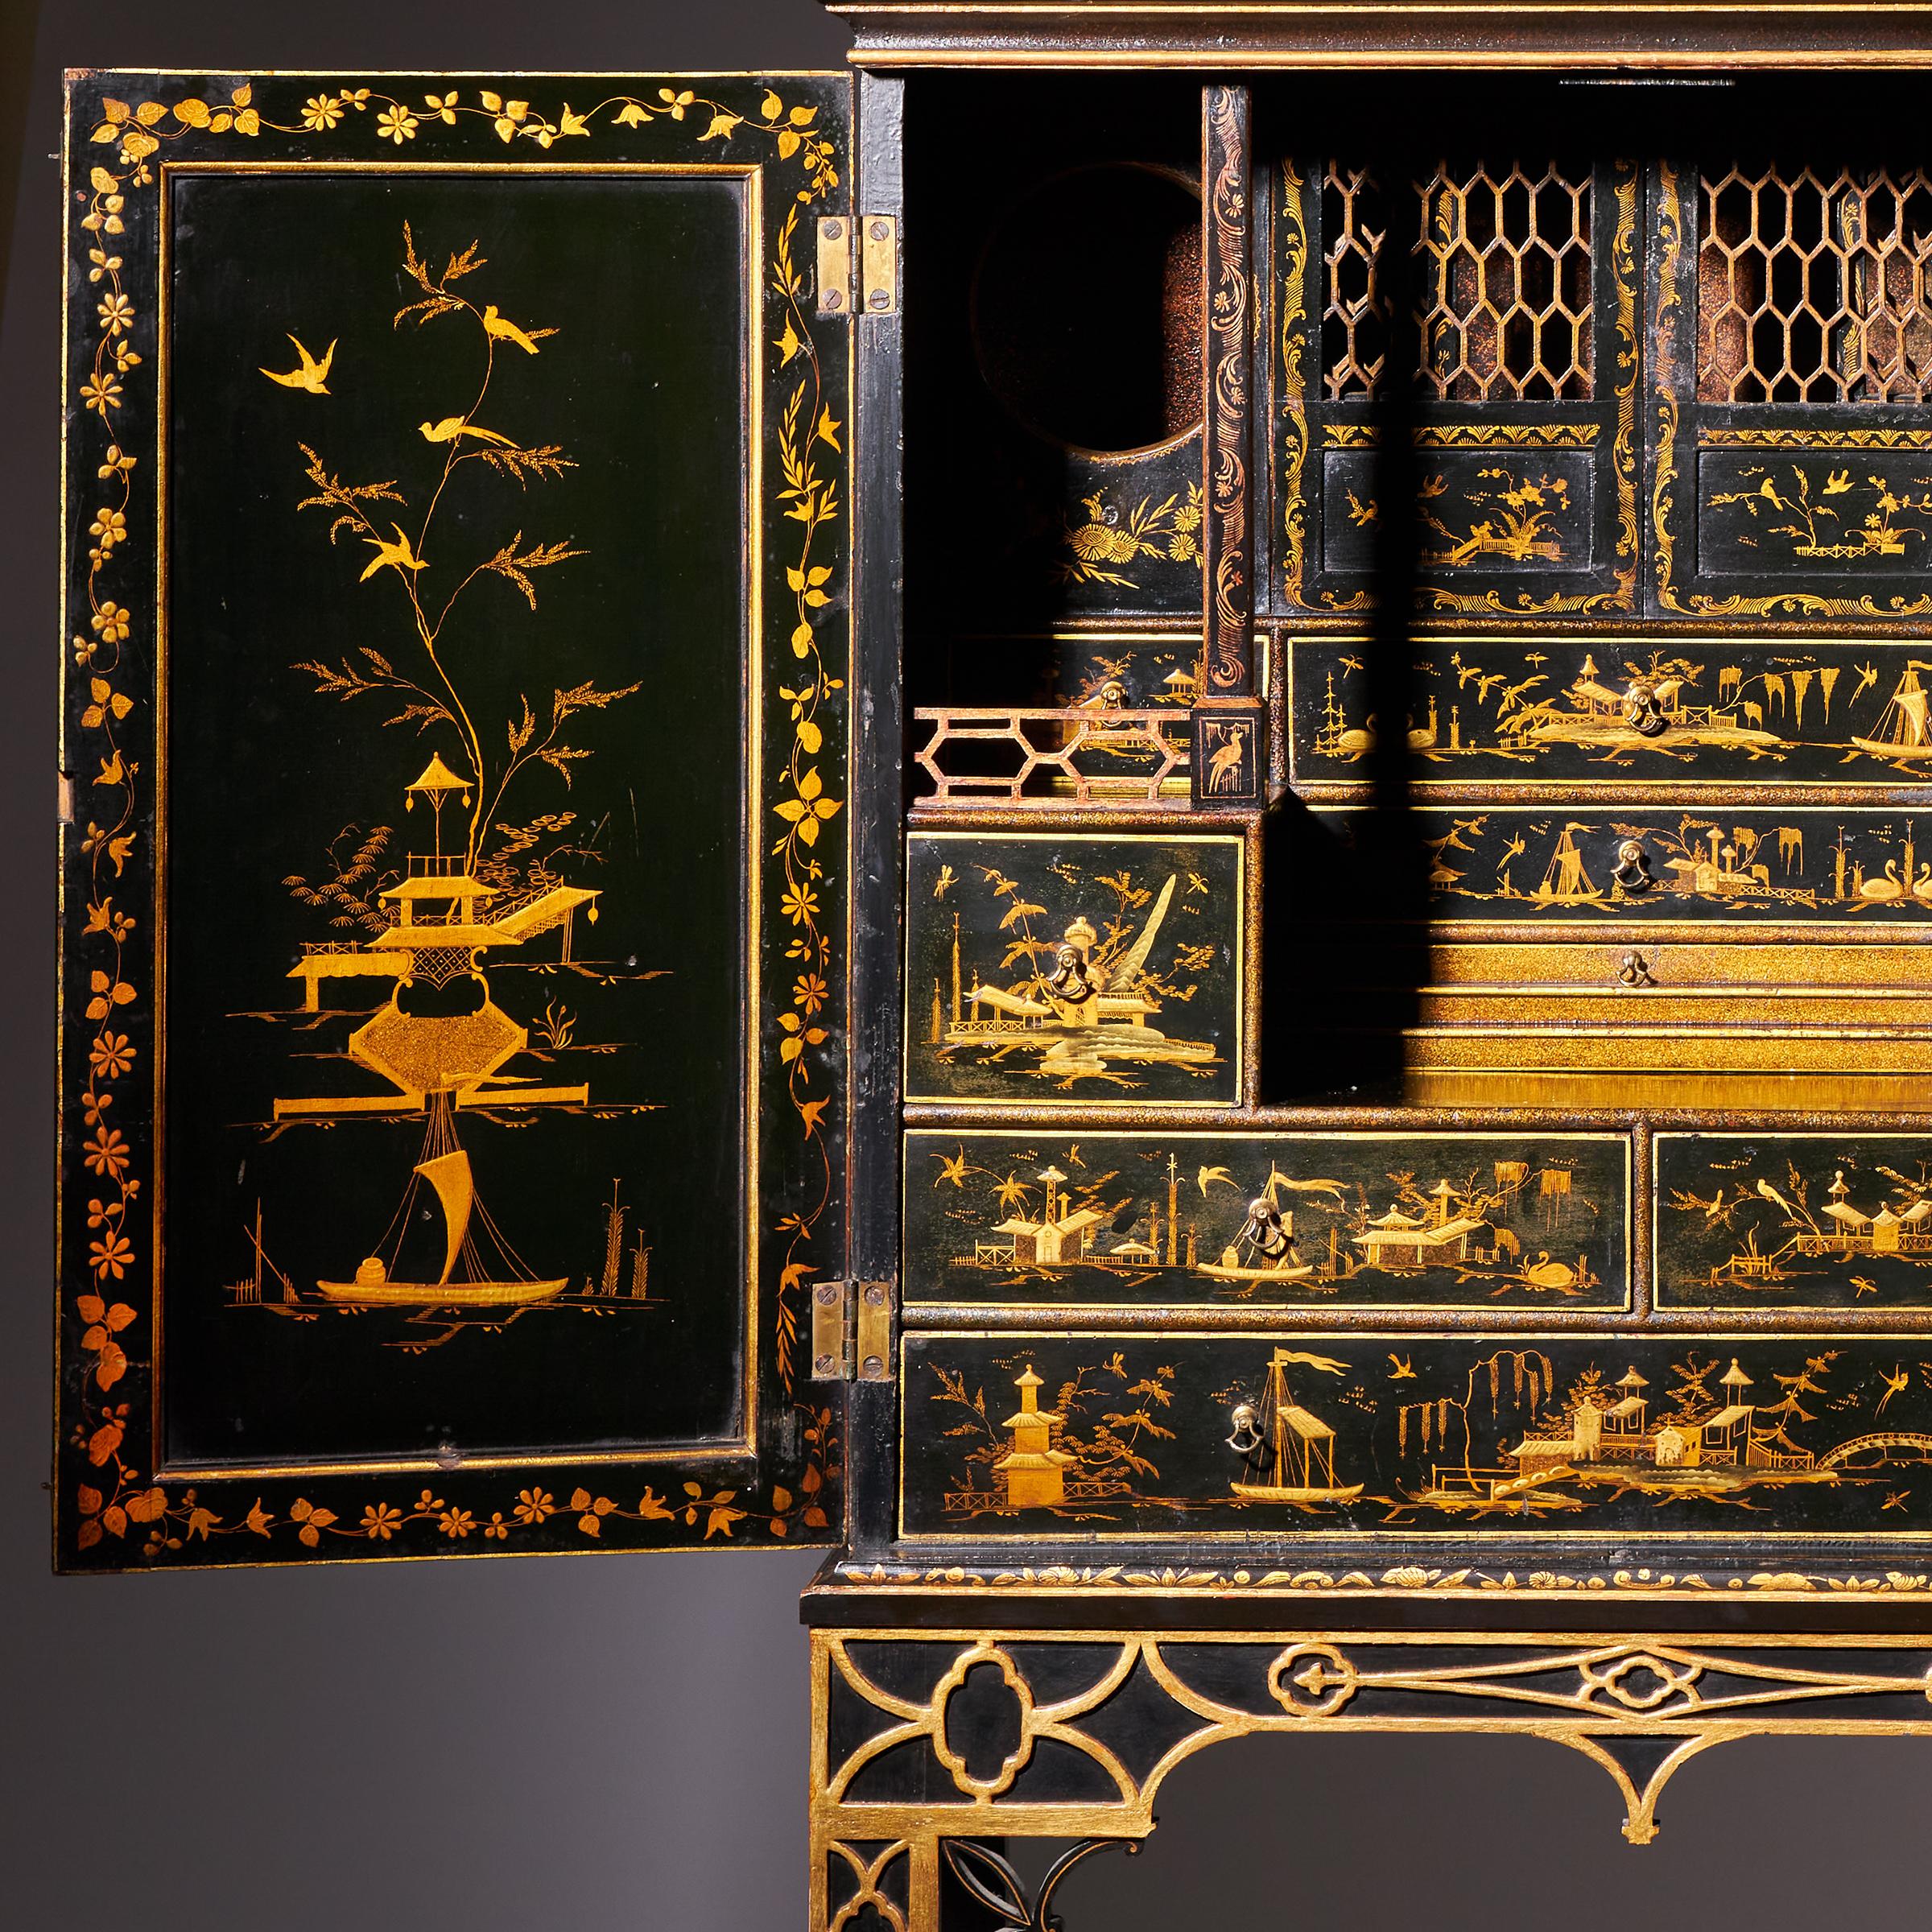 Chêne Rare cabinet chinois Chippendale George III sur stand, vers 1760. Angleterre en vente